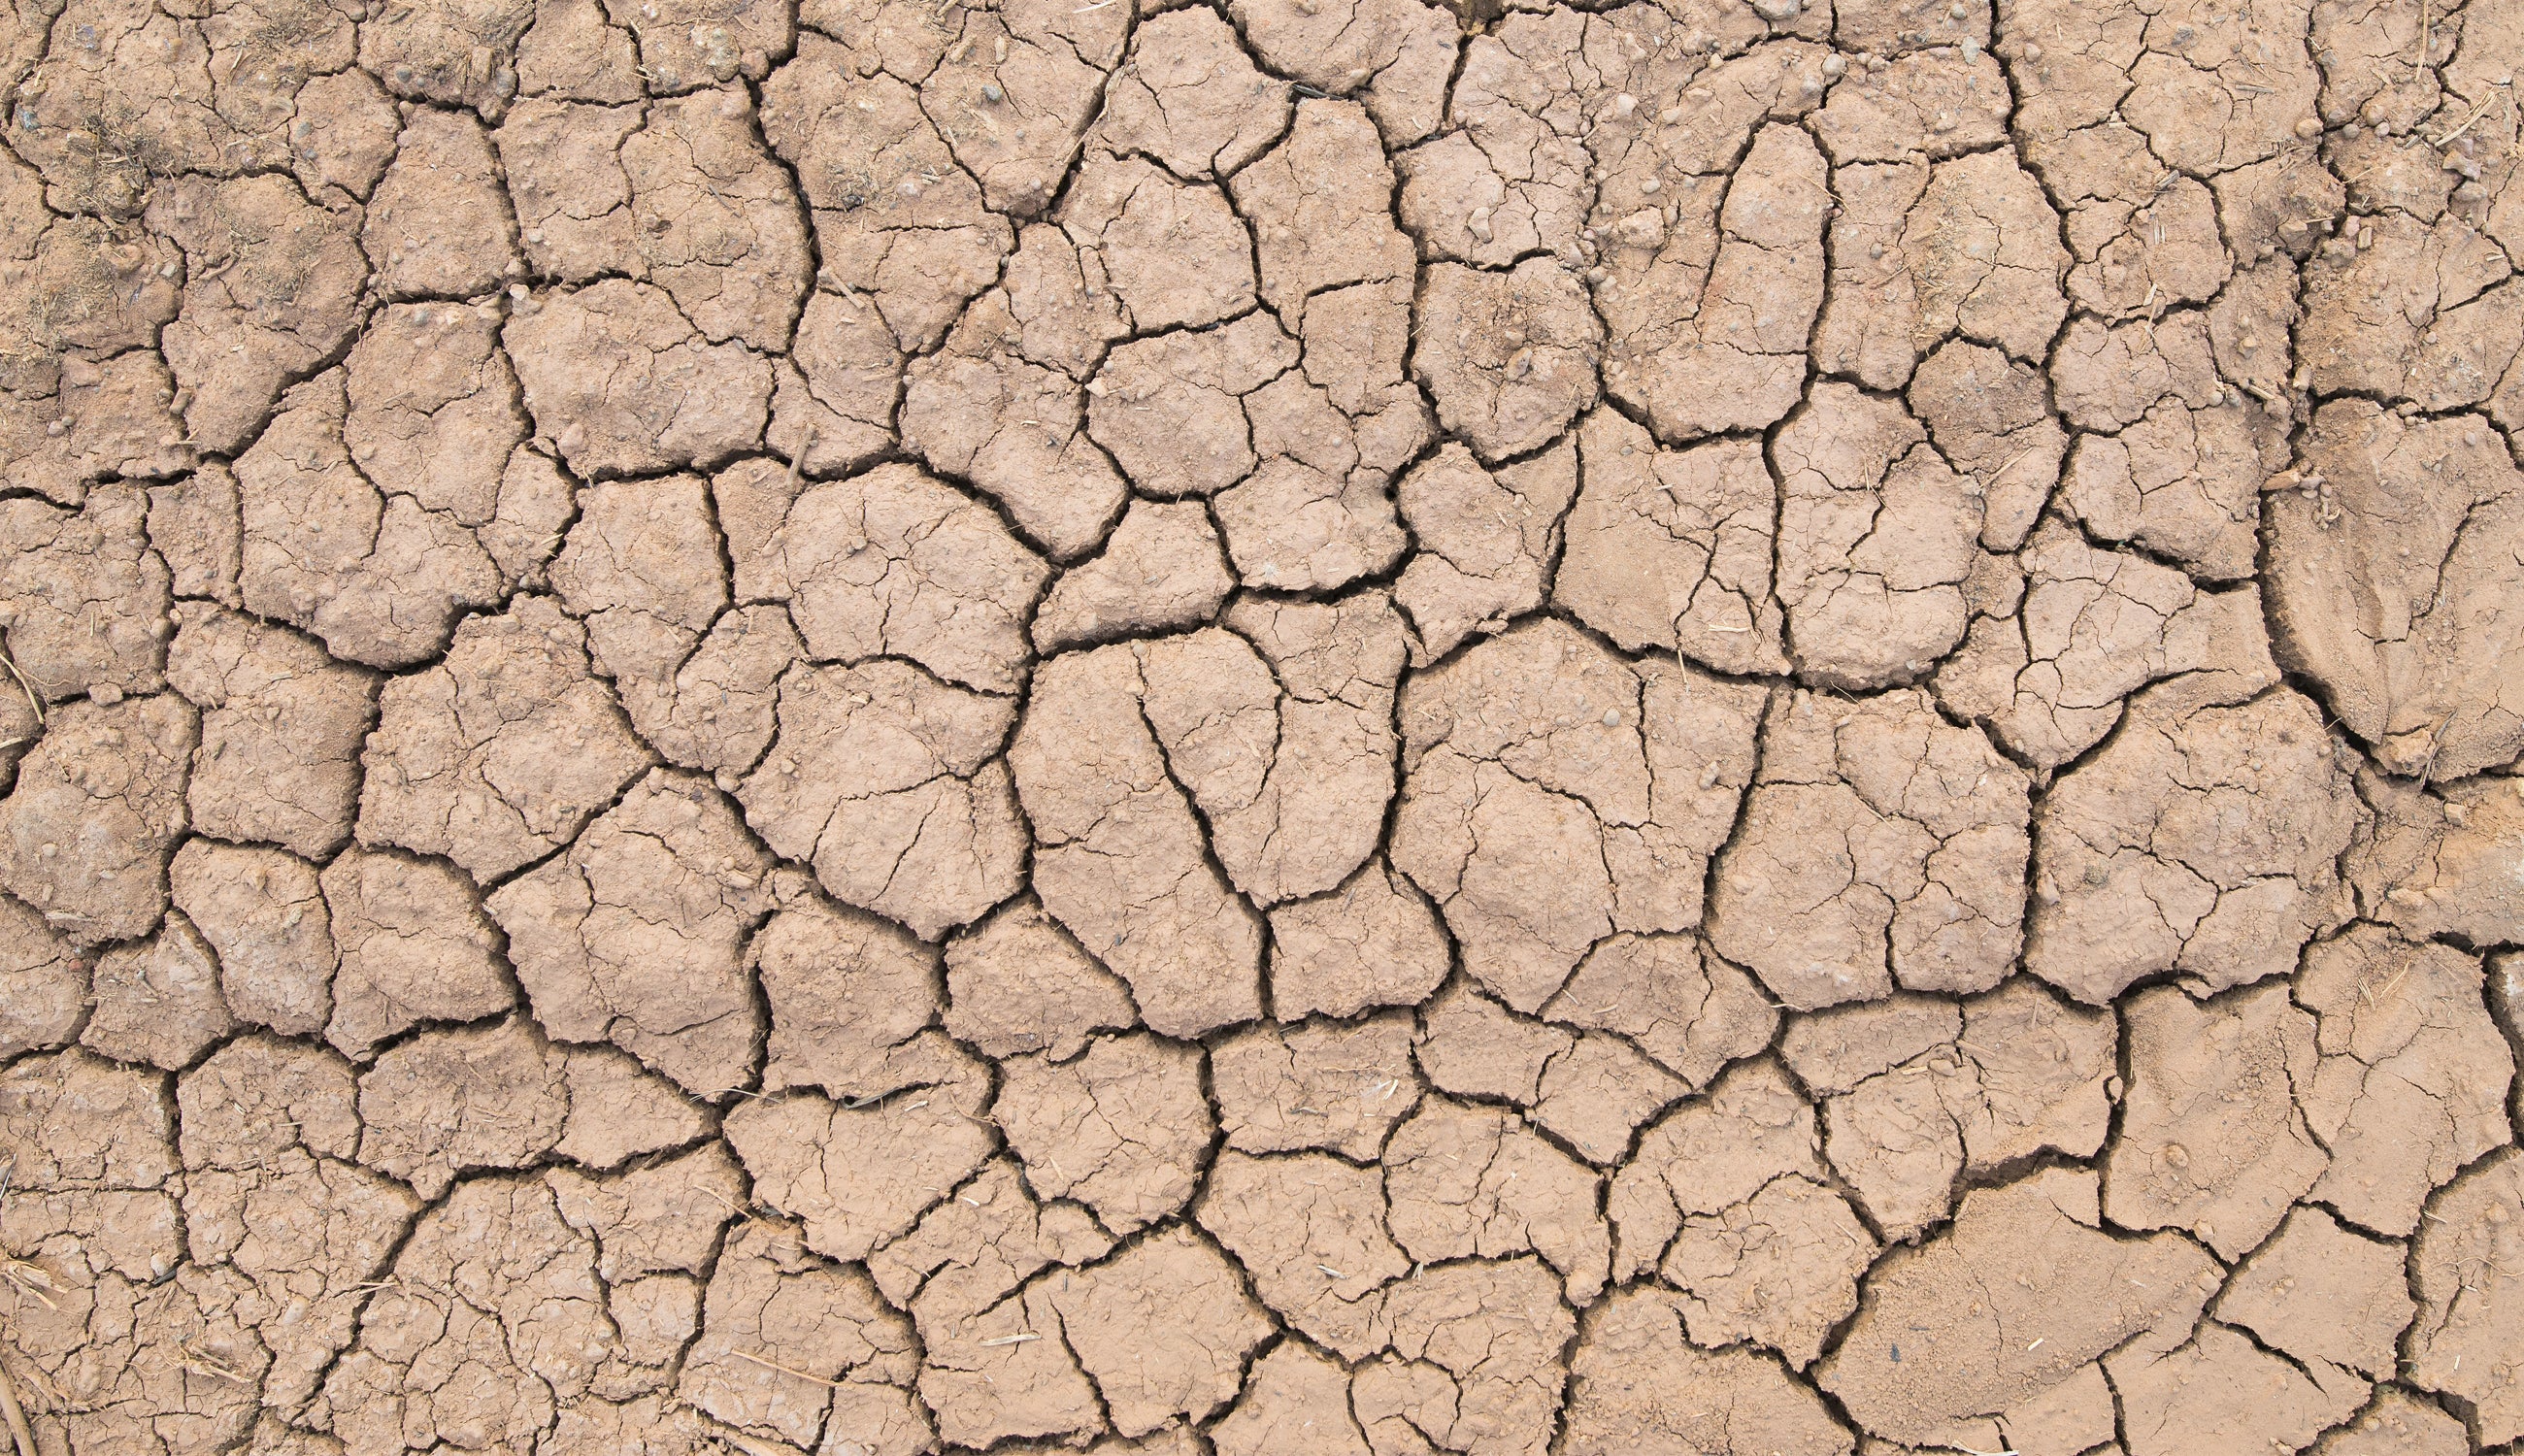 Dried dirt to signify dry skin